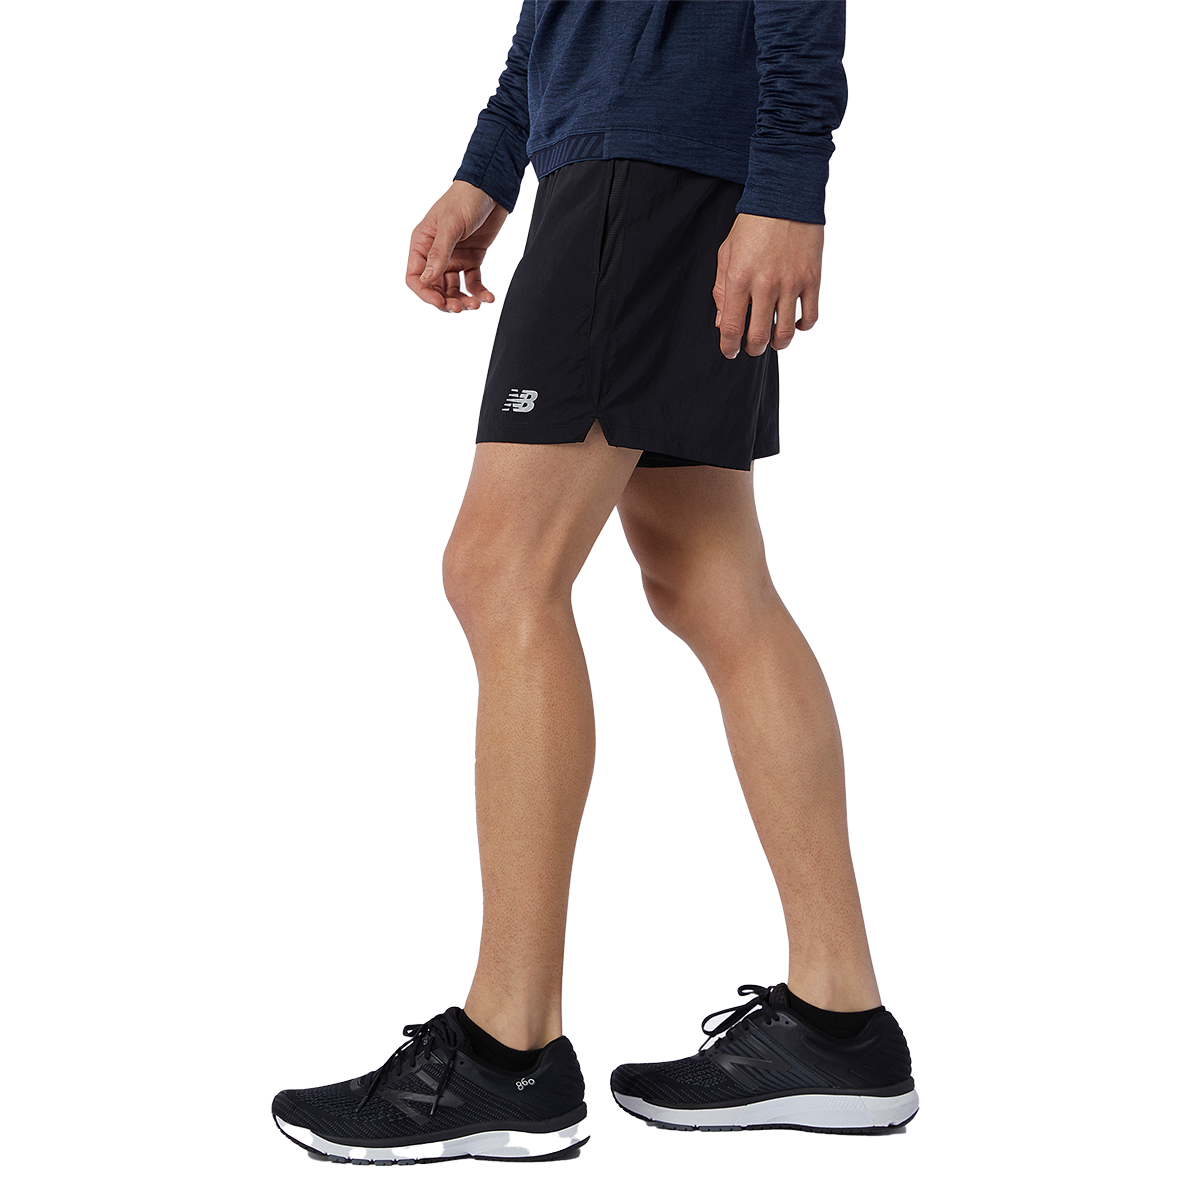 New Balance Accelerate 5" Short, , large image number null